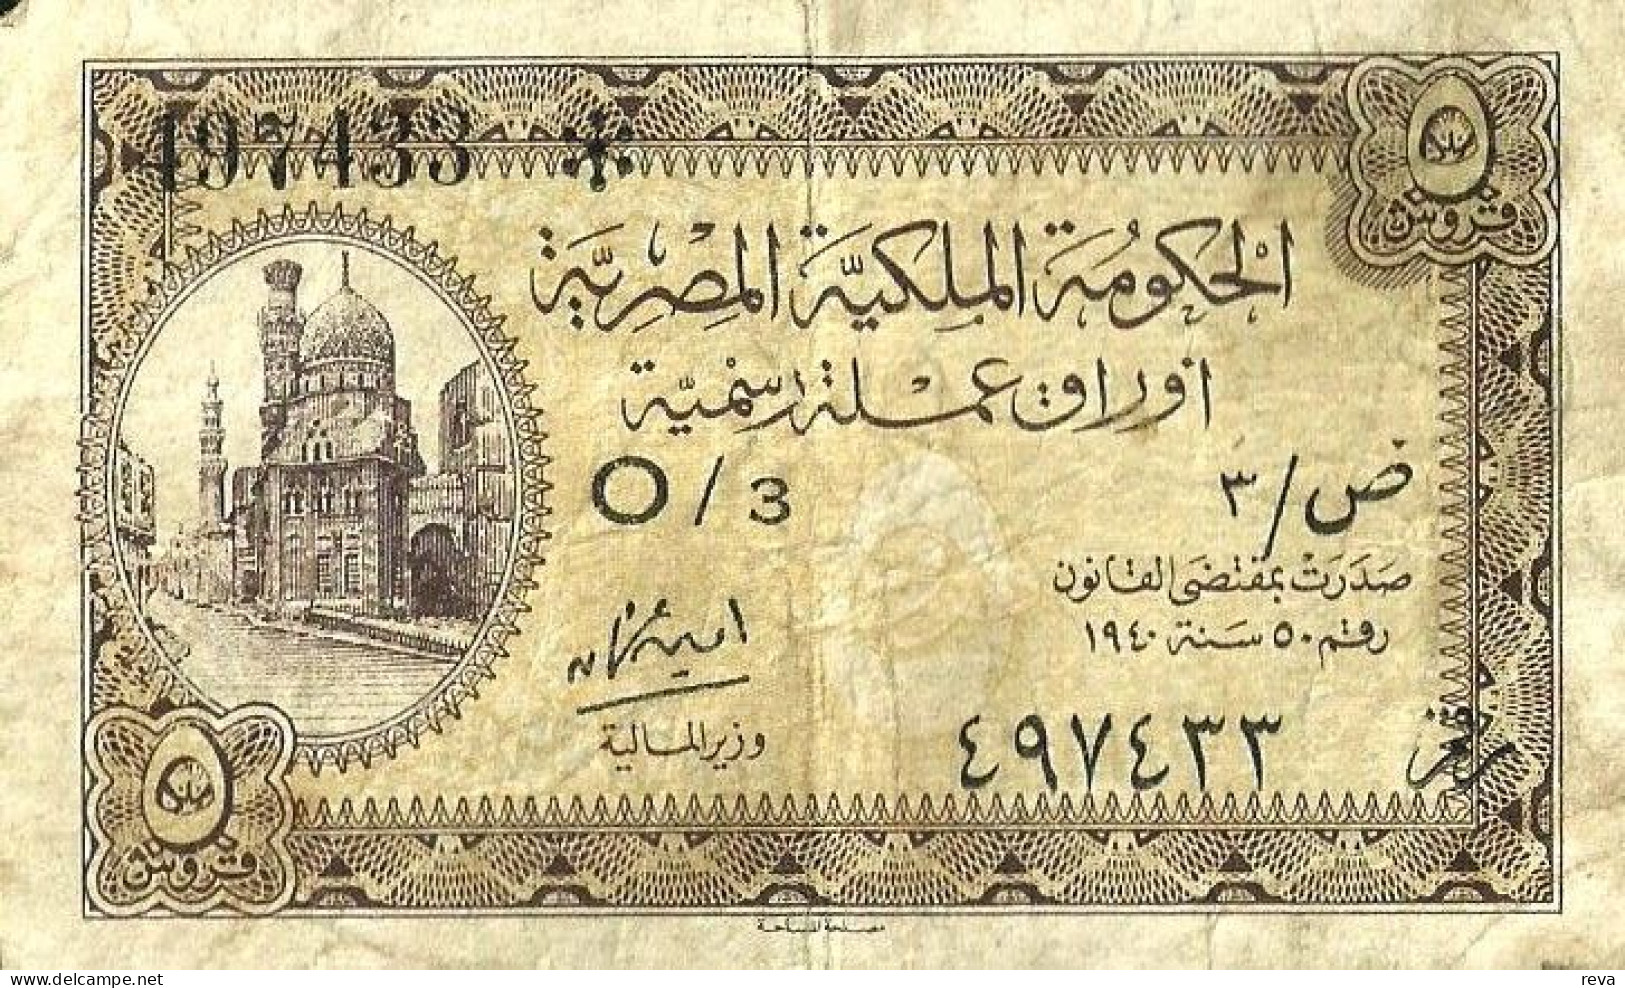 EGYPT 5 PIASTRES BROWN MOSQUE FRONT MOTIF BACK DATED UNDER LAW OF1940 SIGN 4 P165d F+ SCARCE READ DESCRIPTION !! - Egitto